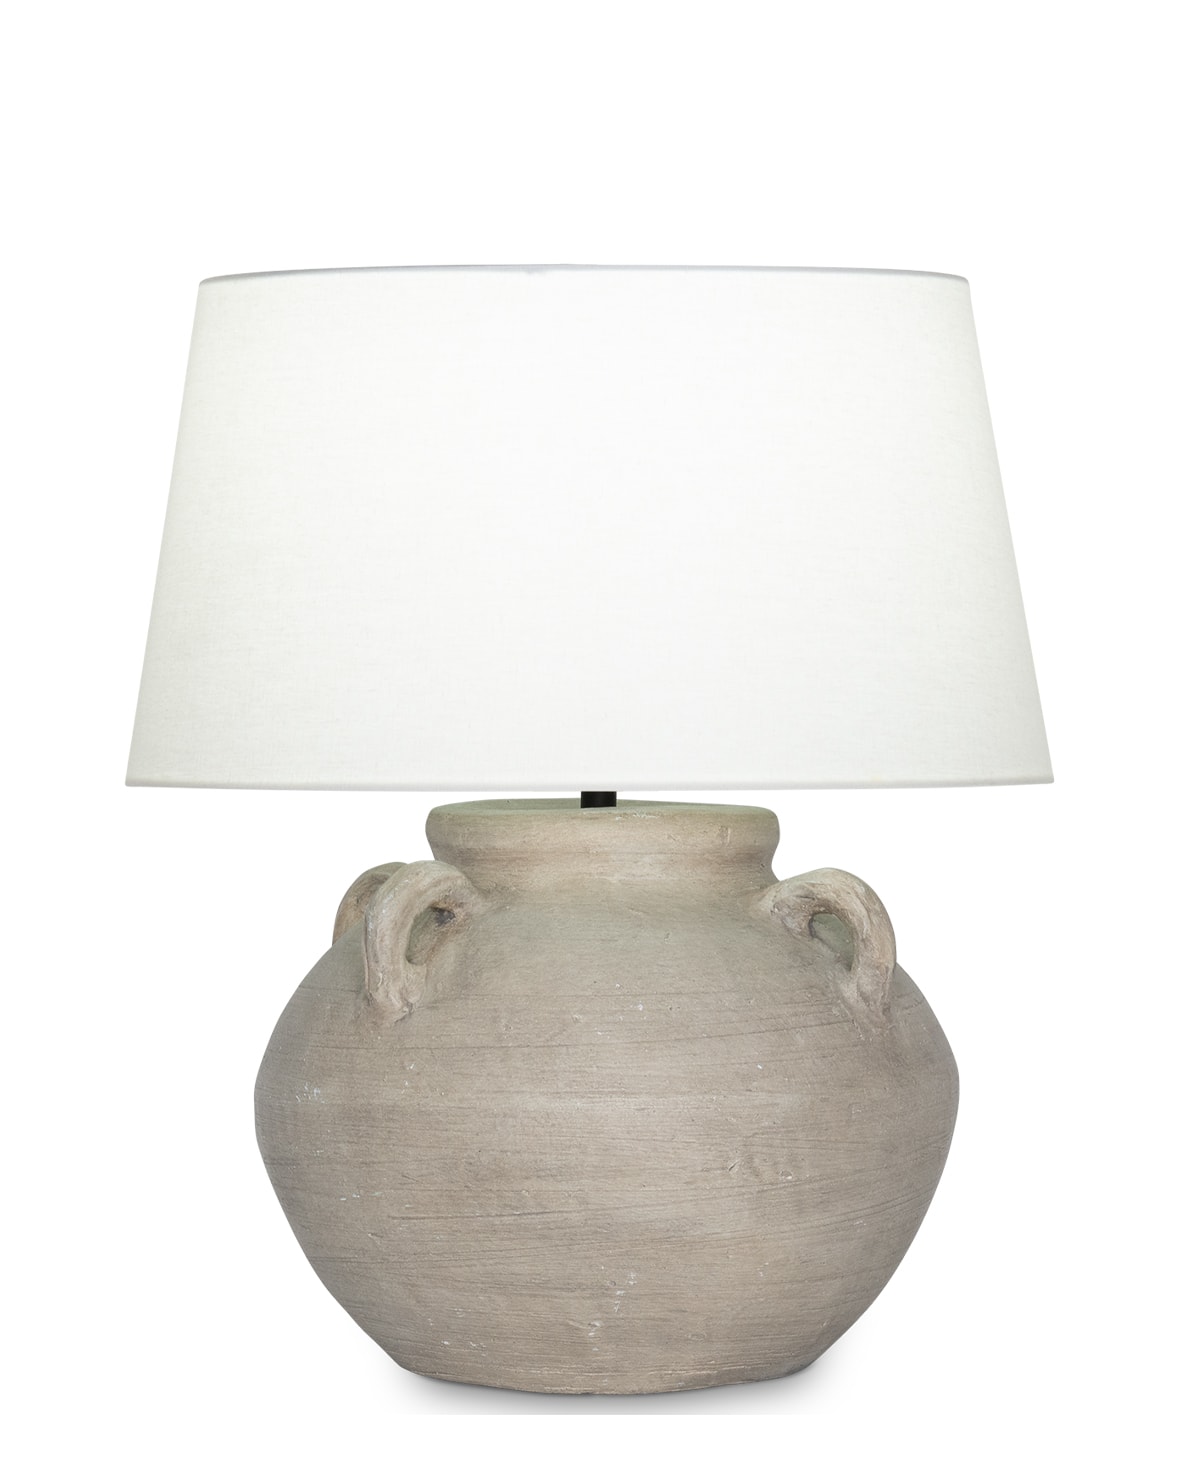 FlowDecor Beale Table Lamp in ceramic with earthy beige finish and off-white linen tapered drum shade (# 4544)